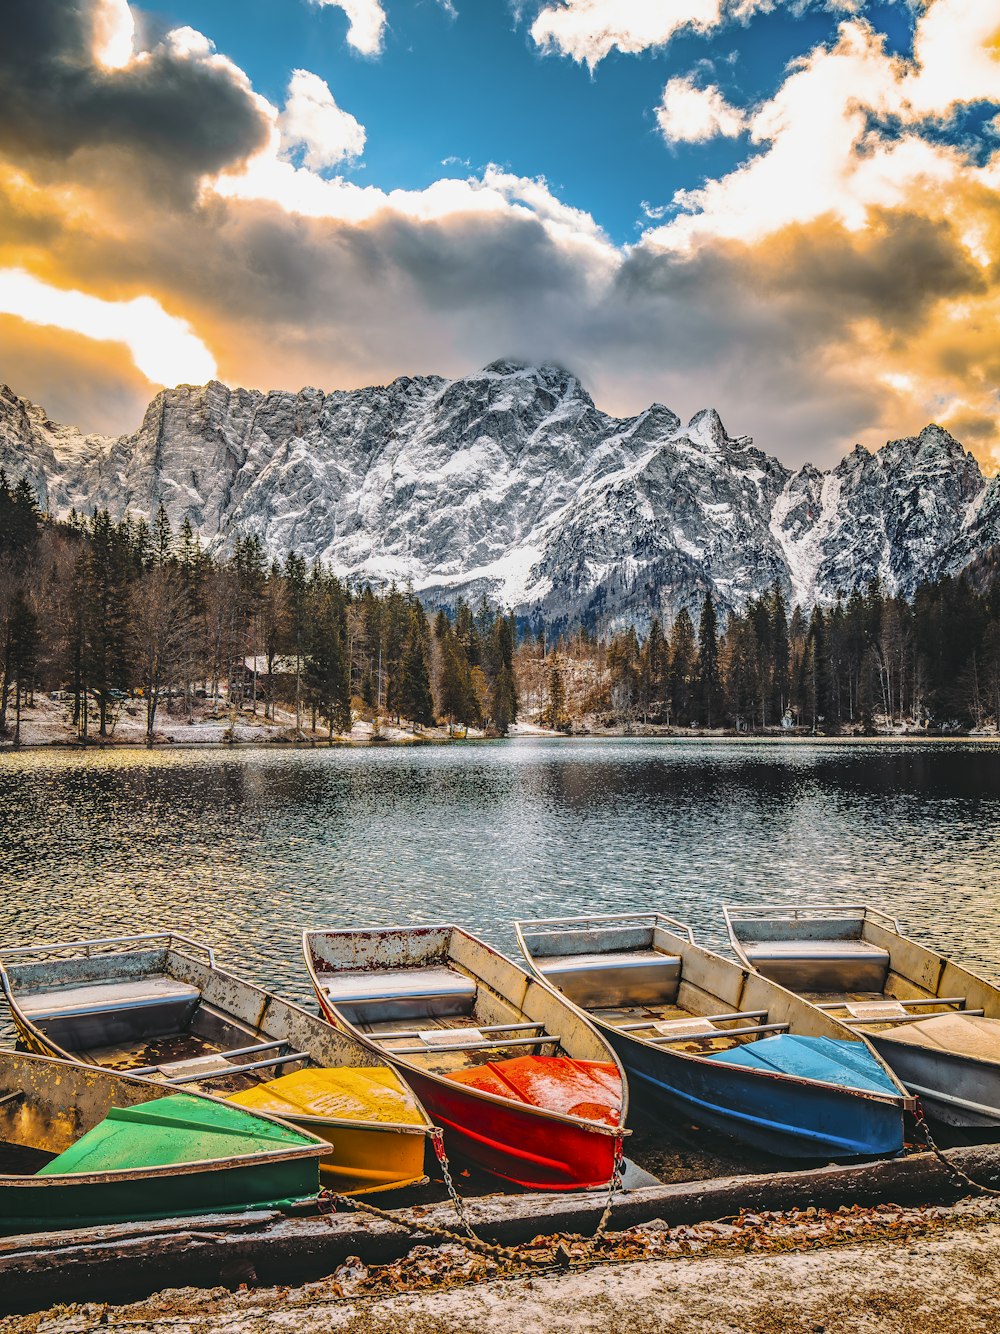 a row of boats sitting on top of a lake